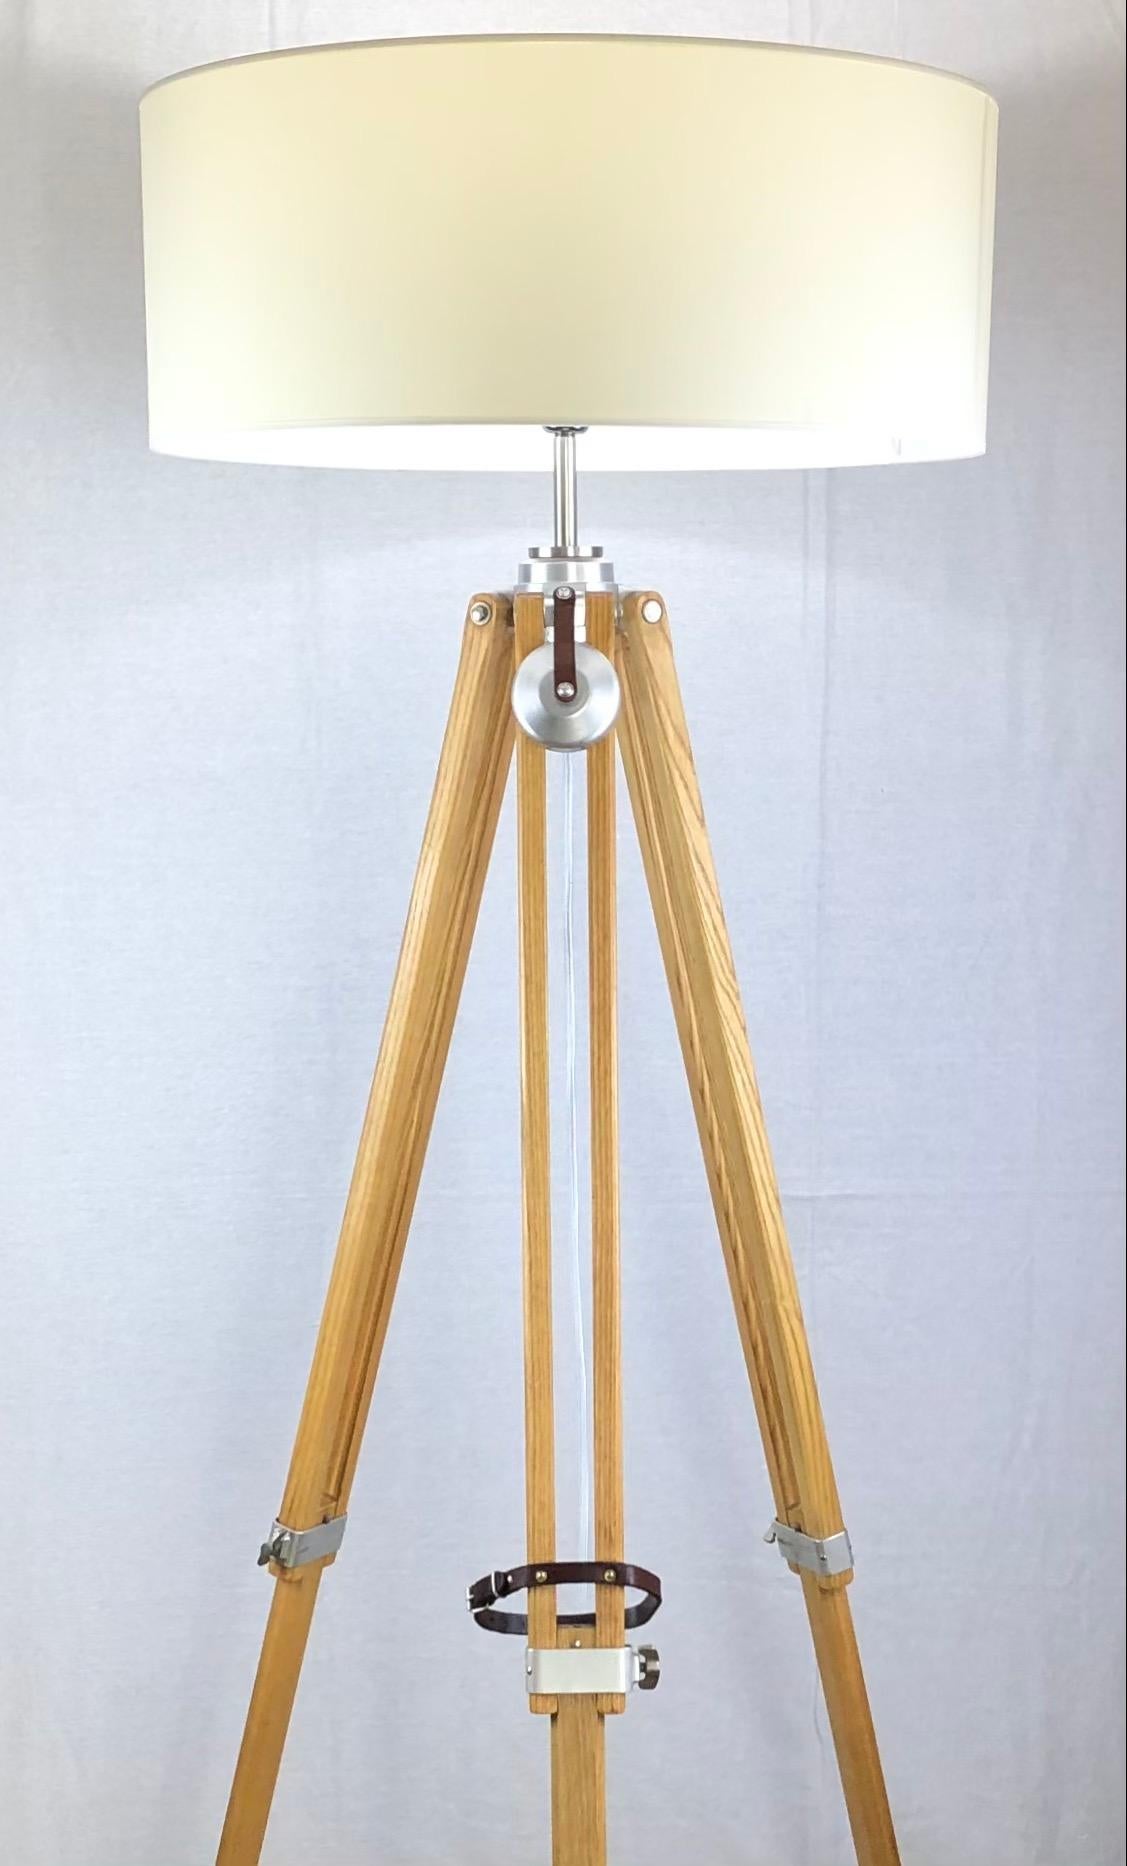 An original vintage surveyor or photographer's tripod converted into a floor lamp. This important iconic piece of Swiss history makes a beautiful floor lamp and embodies all the classical elements of the era. Made by and stamped Kern Aarau,